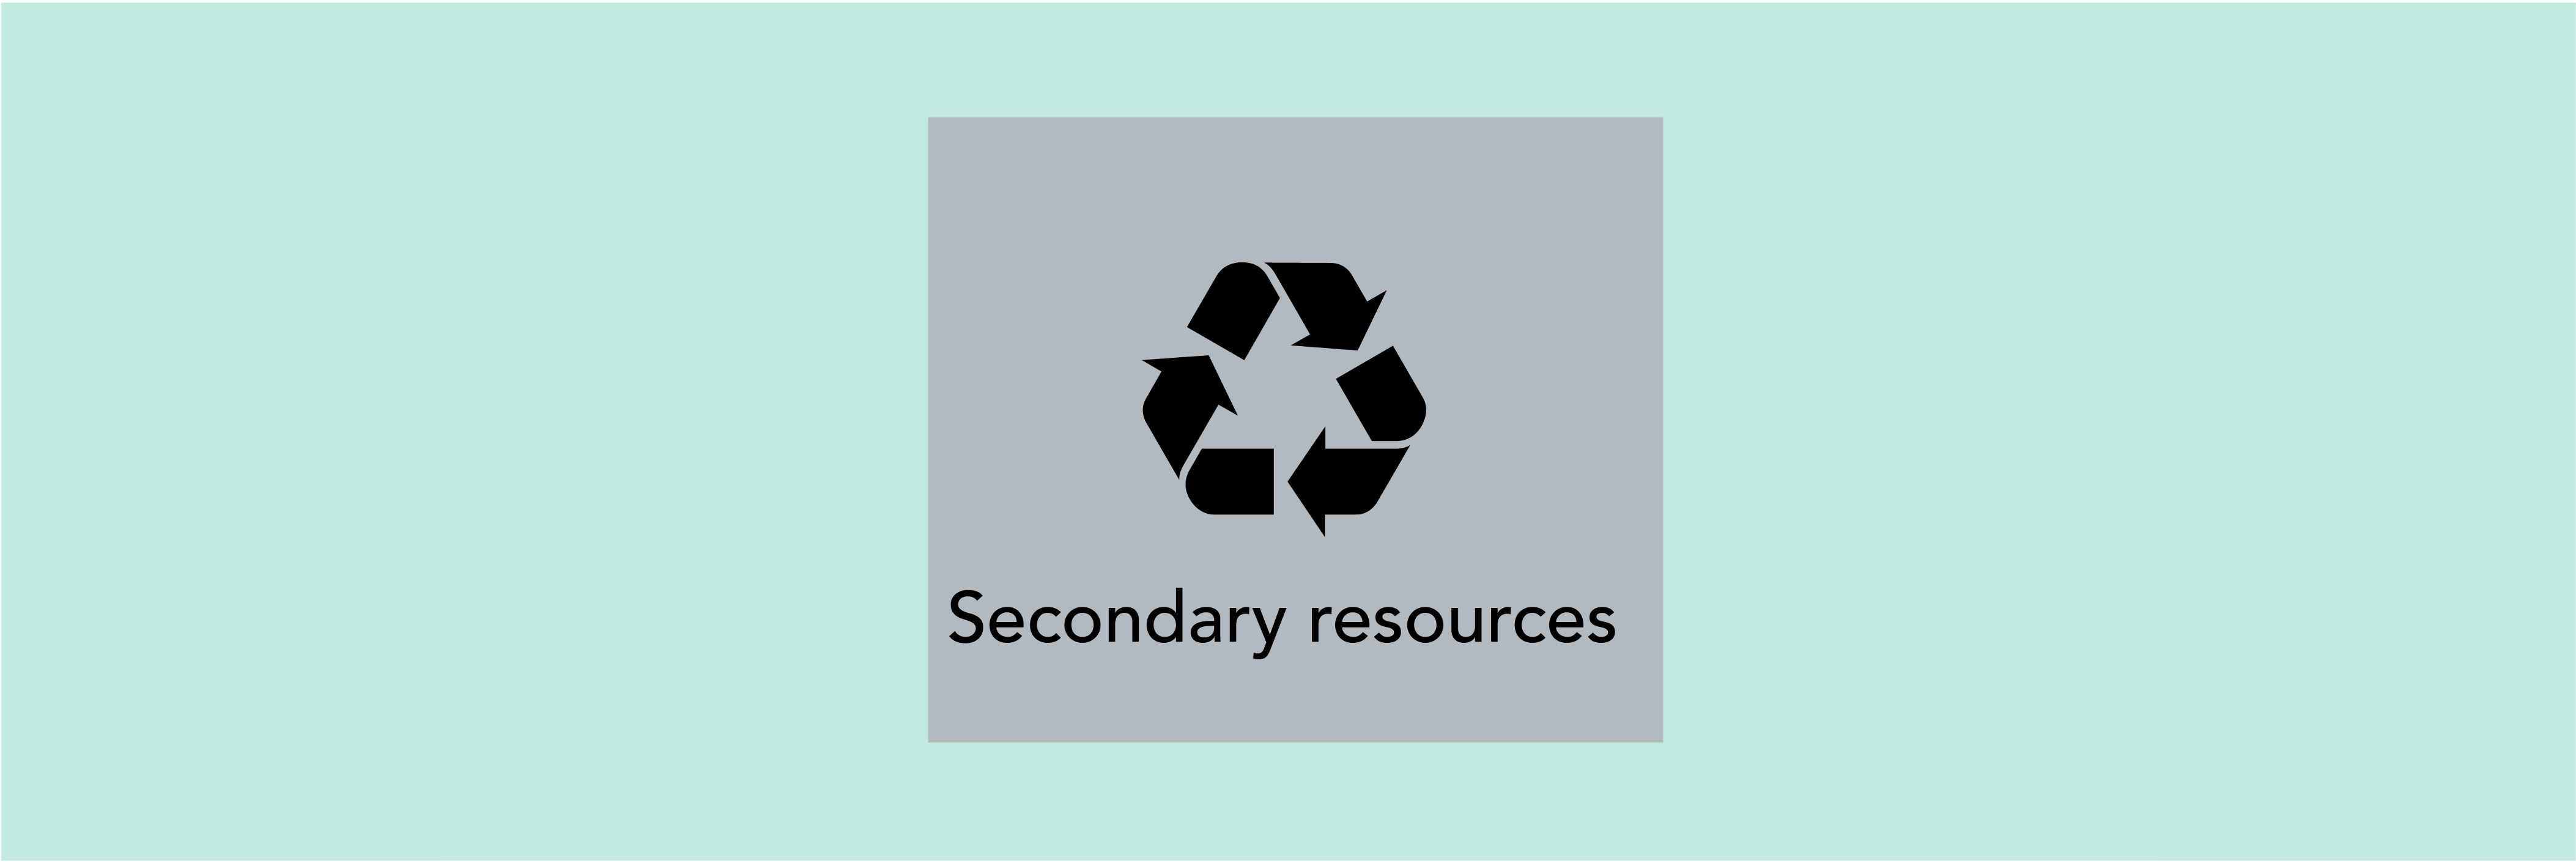 Biomass from secondary resources.